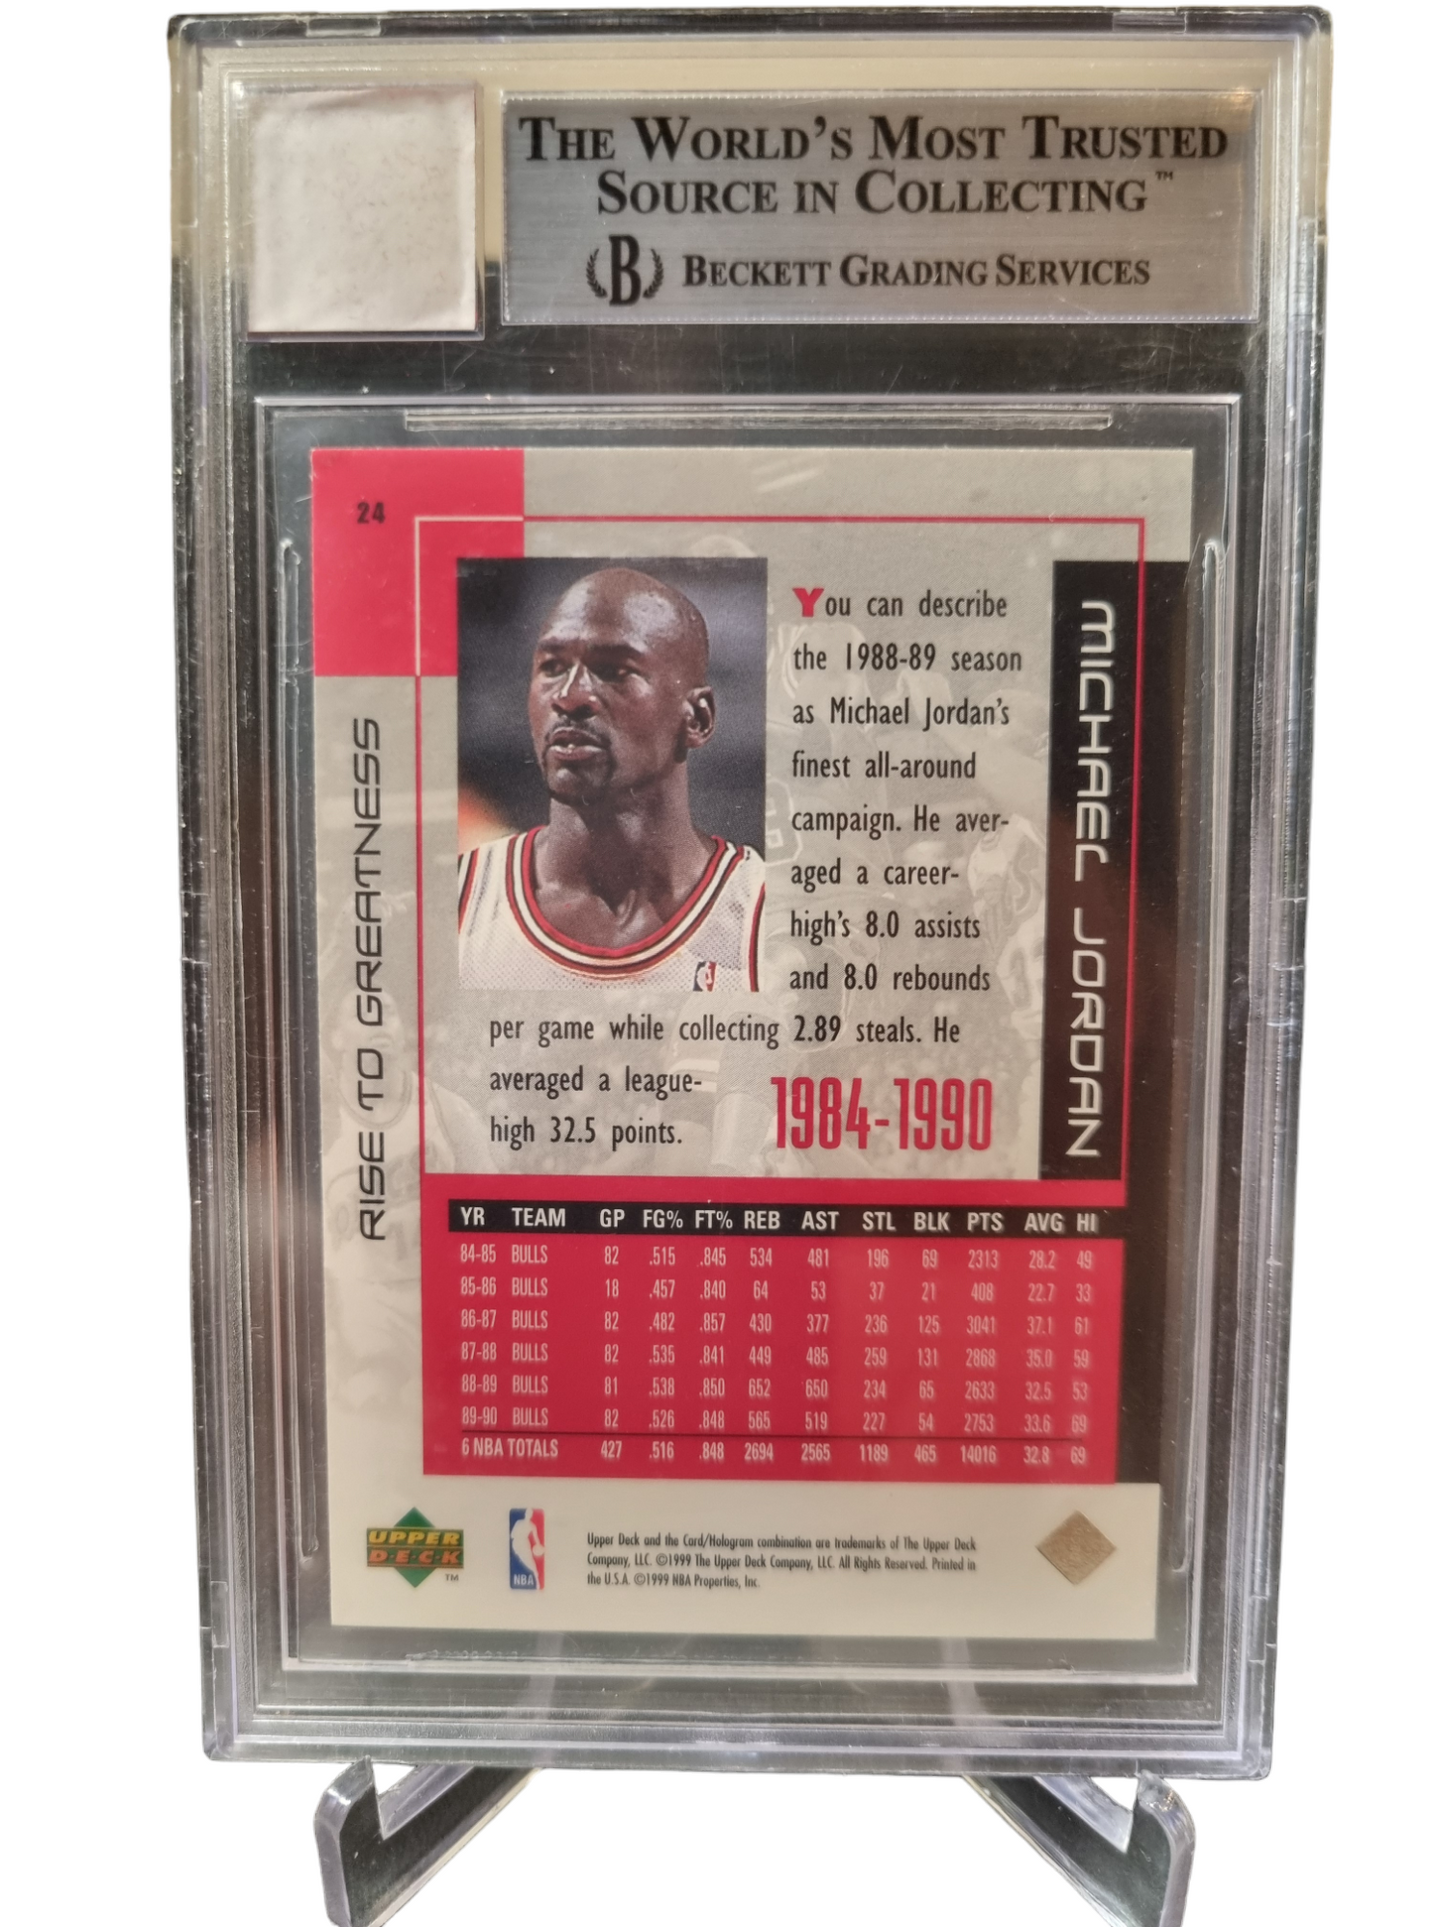 1999 Upper Deck #24 Michael Jordan Rise to Greatness 1986 Game Used Certified Jersey